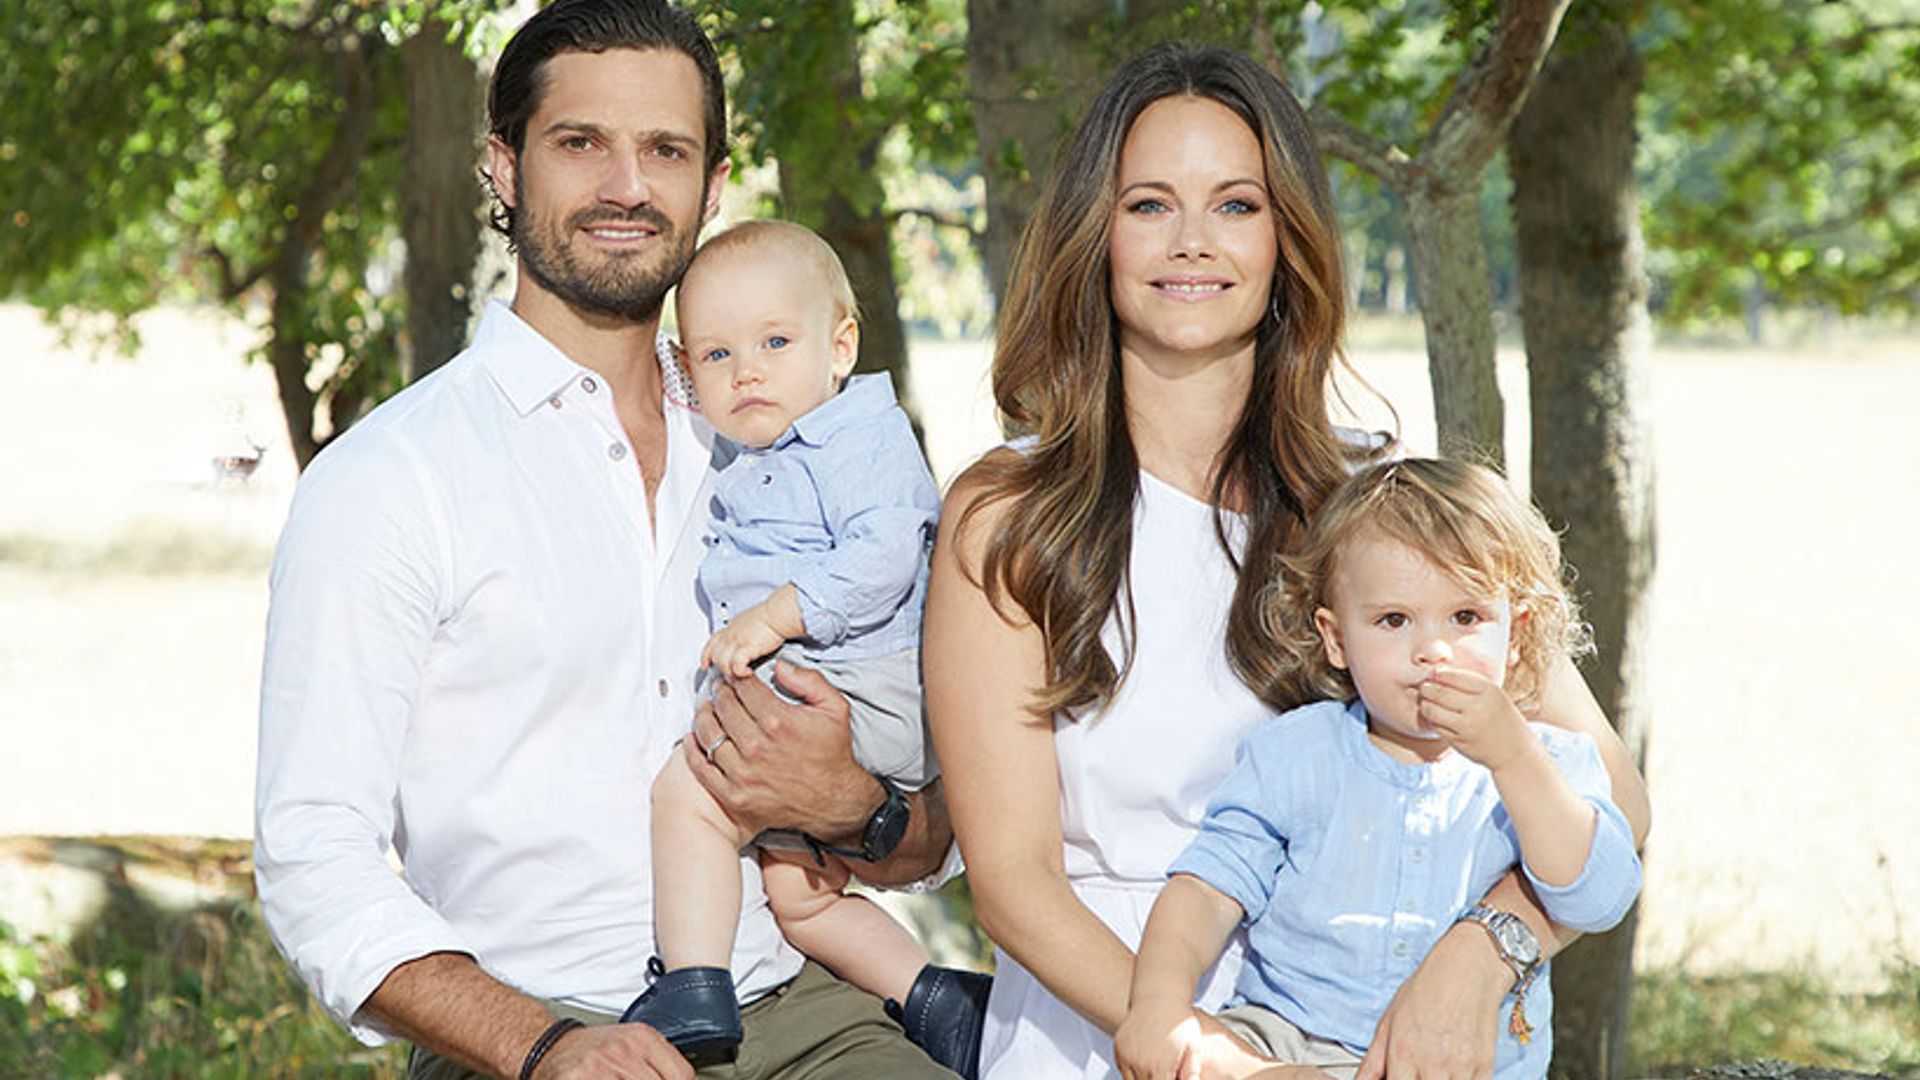 Swedish royal family release sweet pictures to mark Prince Gabriel's first birthday